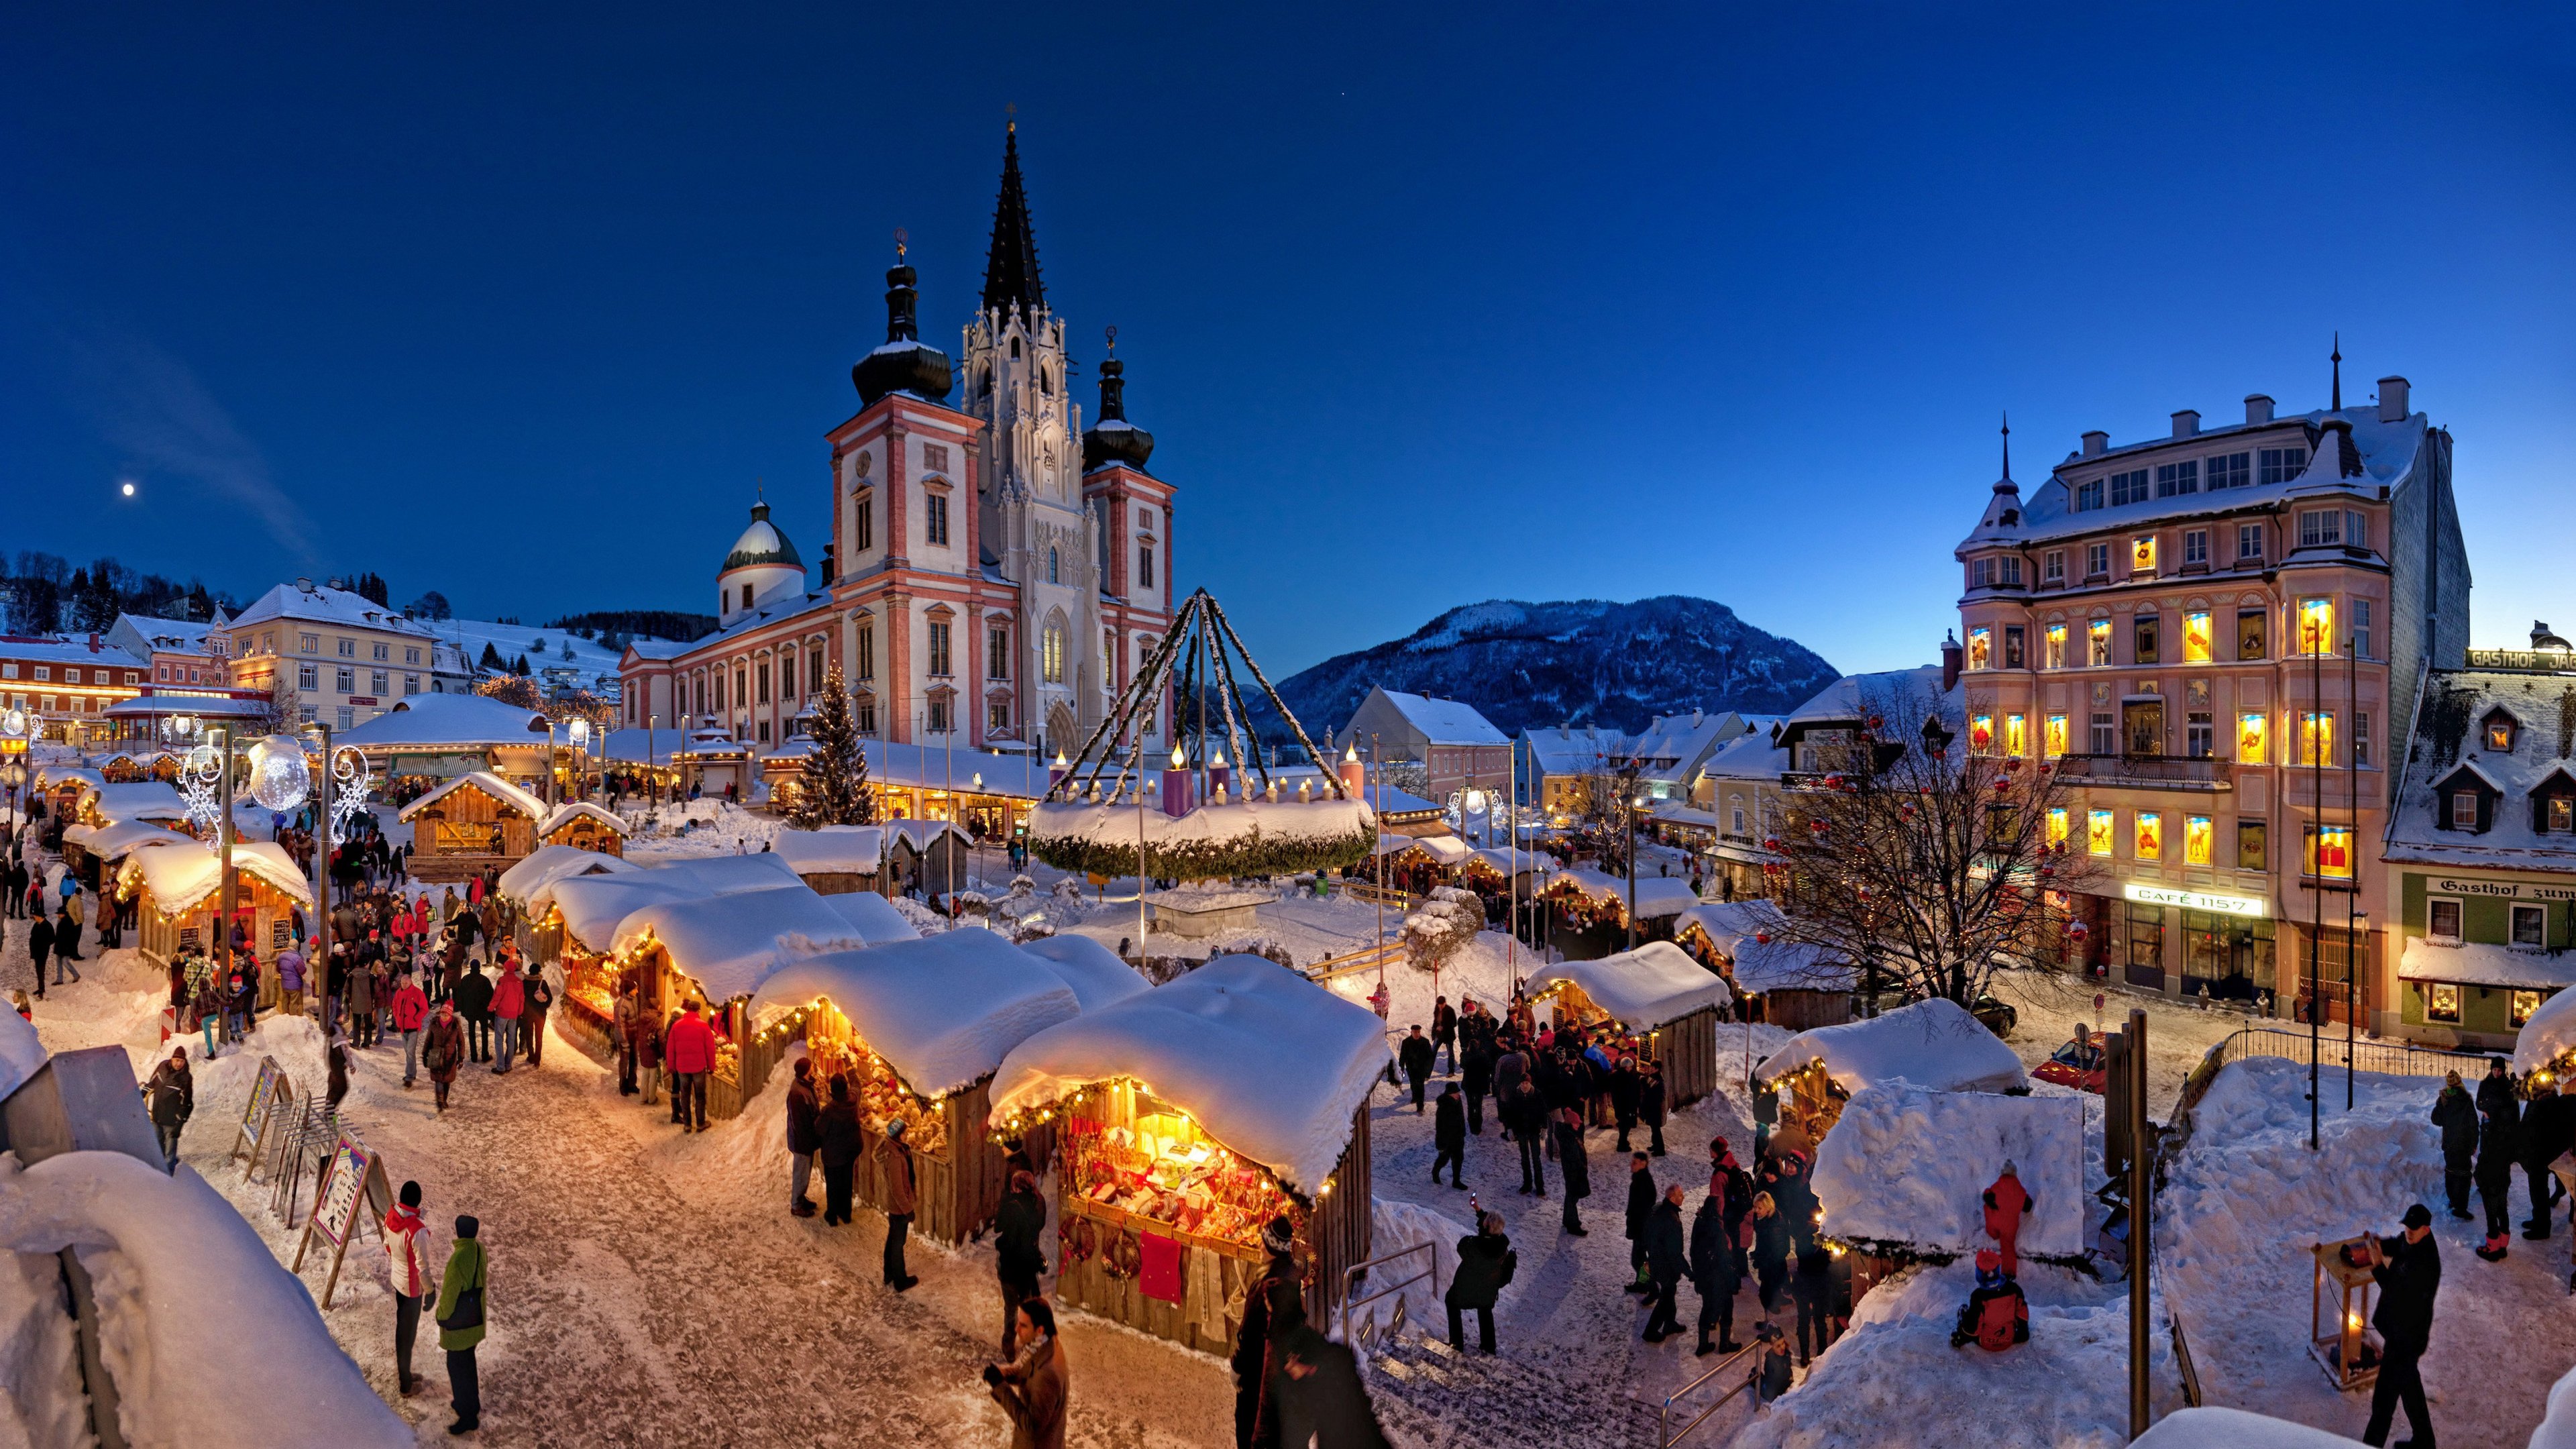 wallpapers christmas, decoration, light, holiday, people, night, building, city, market, snow, square